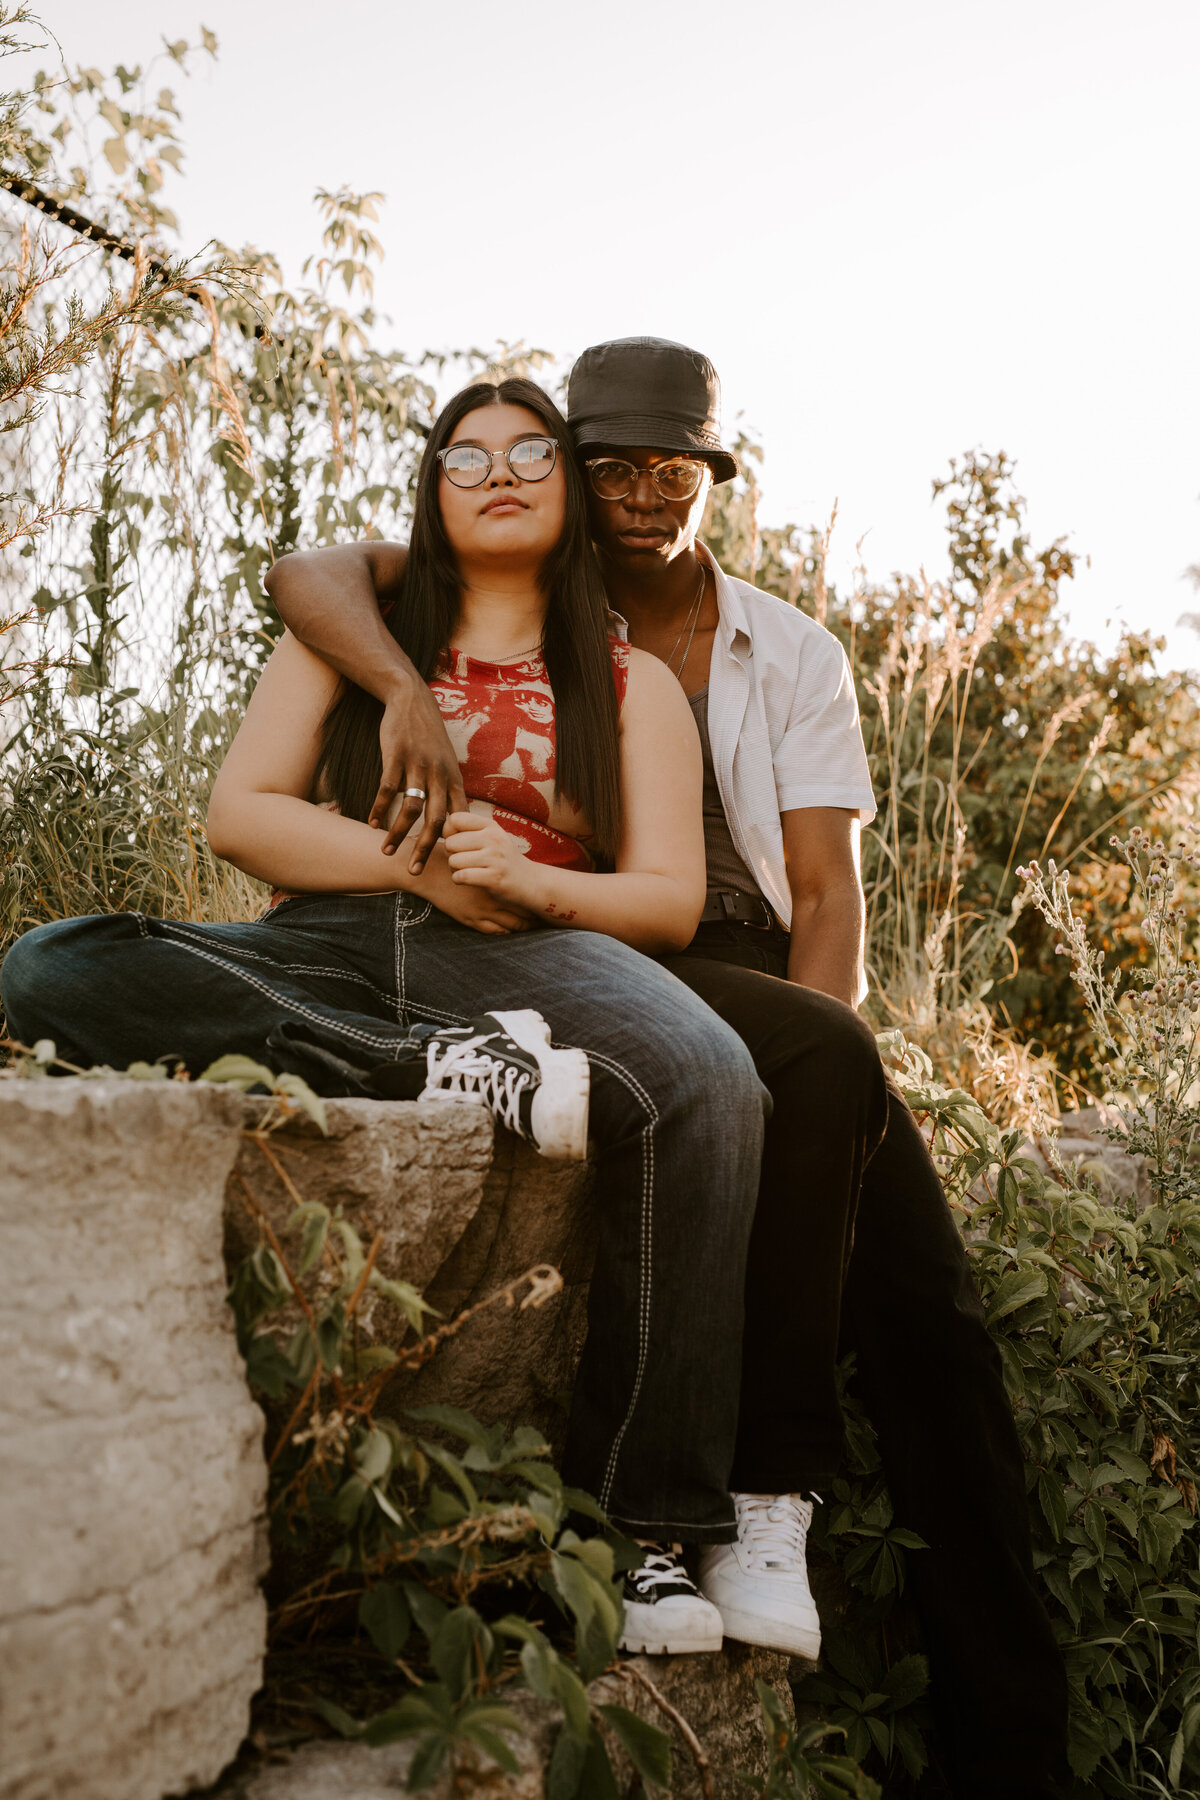 toronto-couples-session-queen-west-99-sudbury-summer-vibes-40